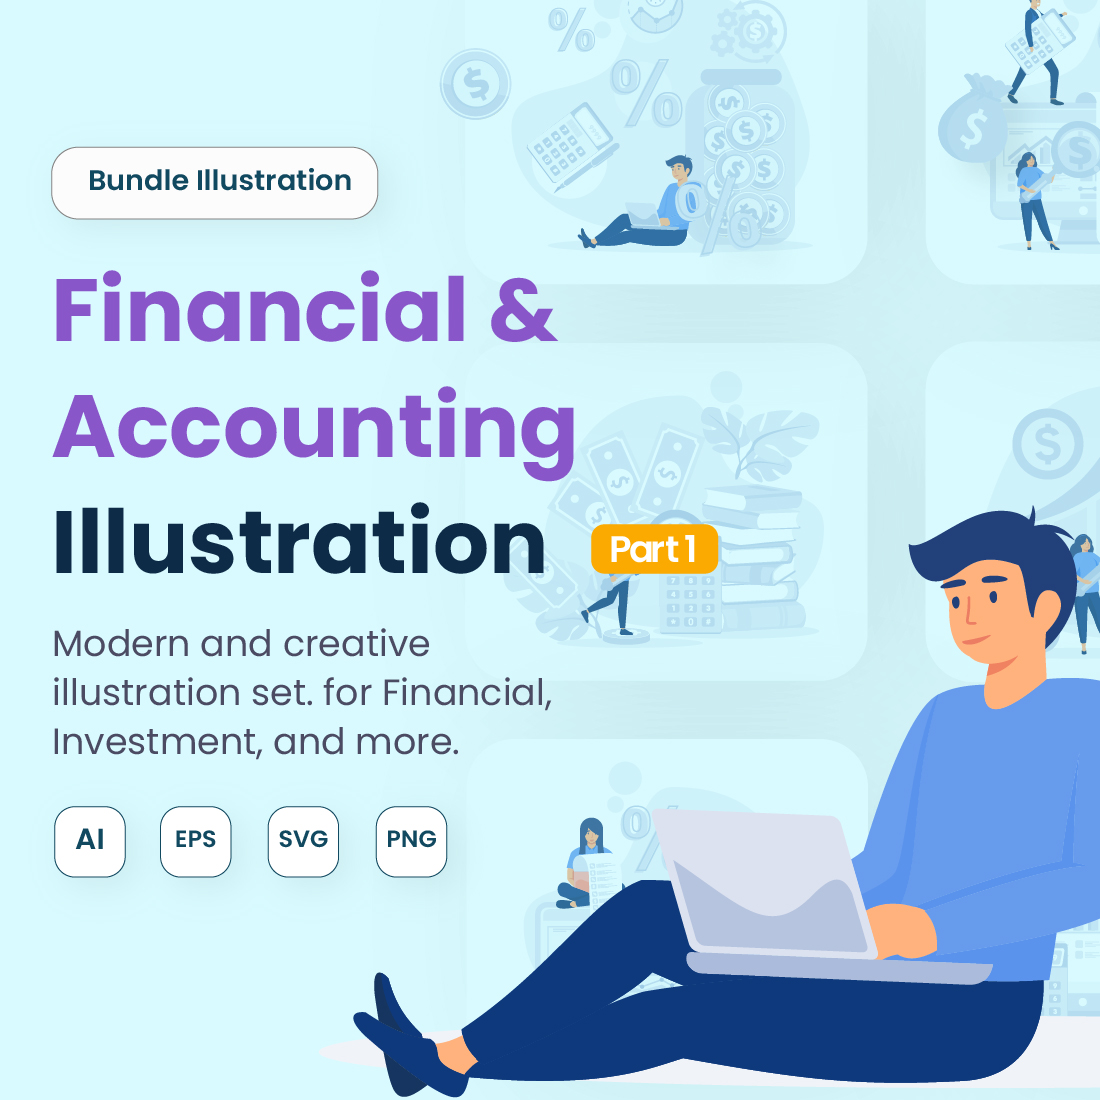 Financial Accounting Web UI Illustration cover image.